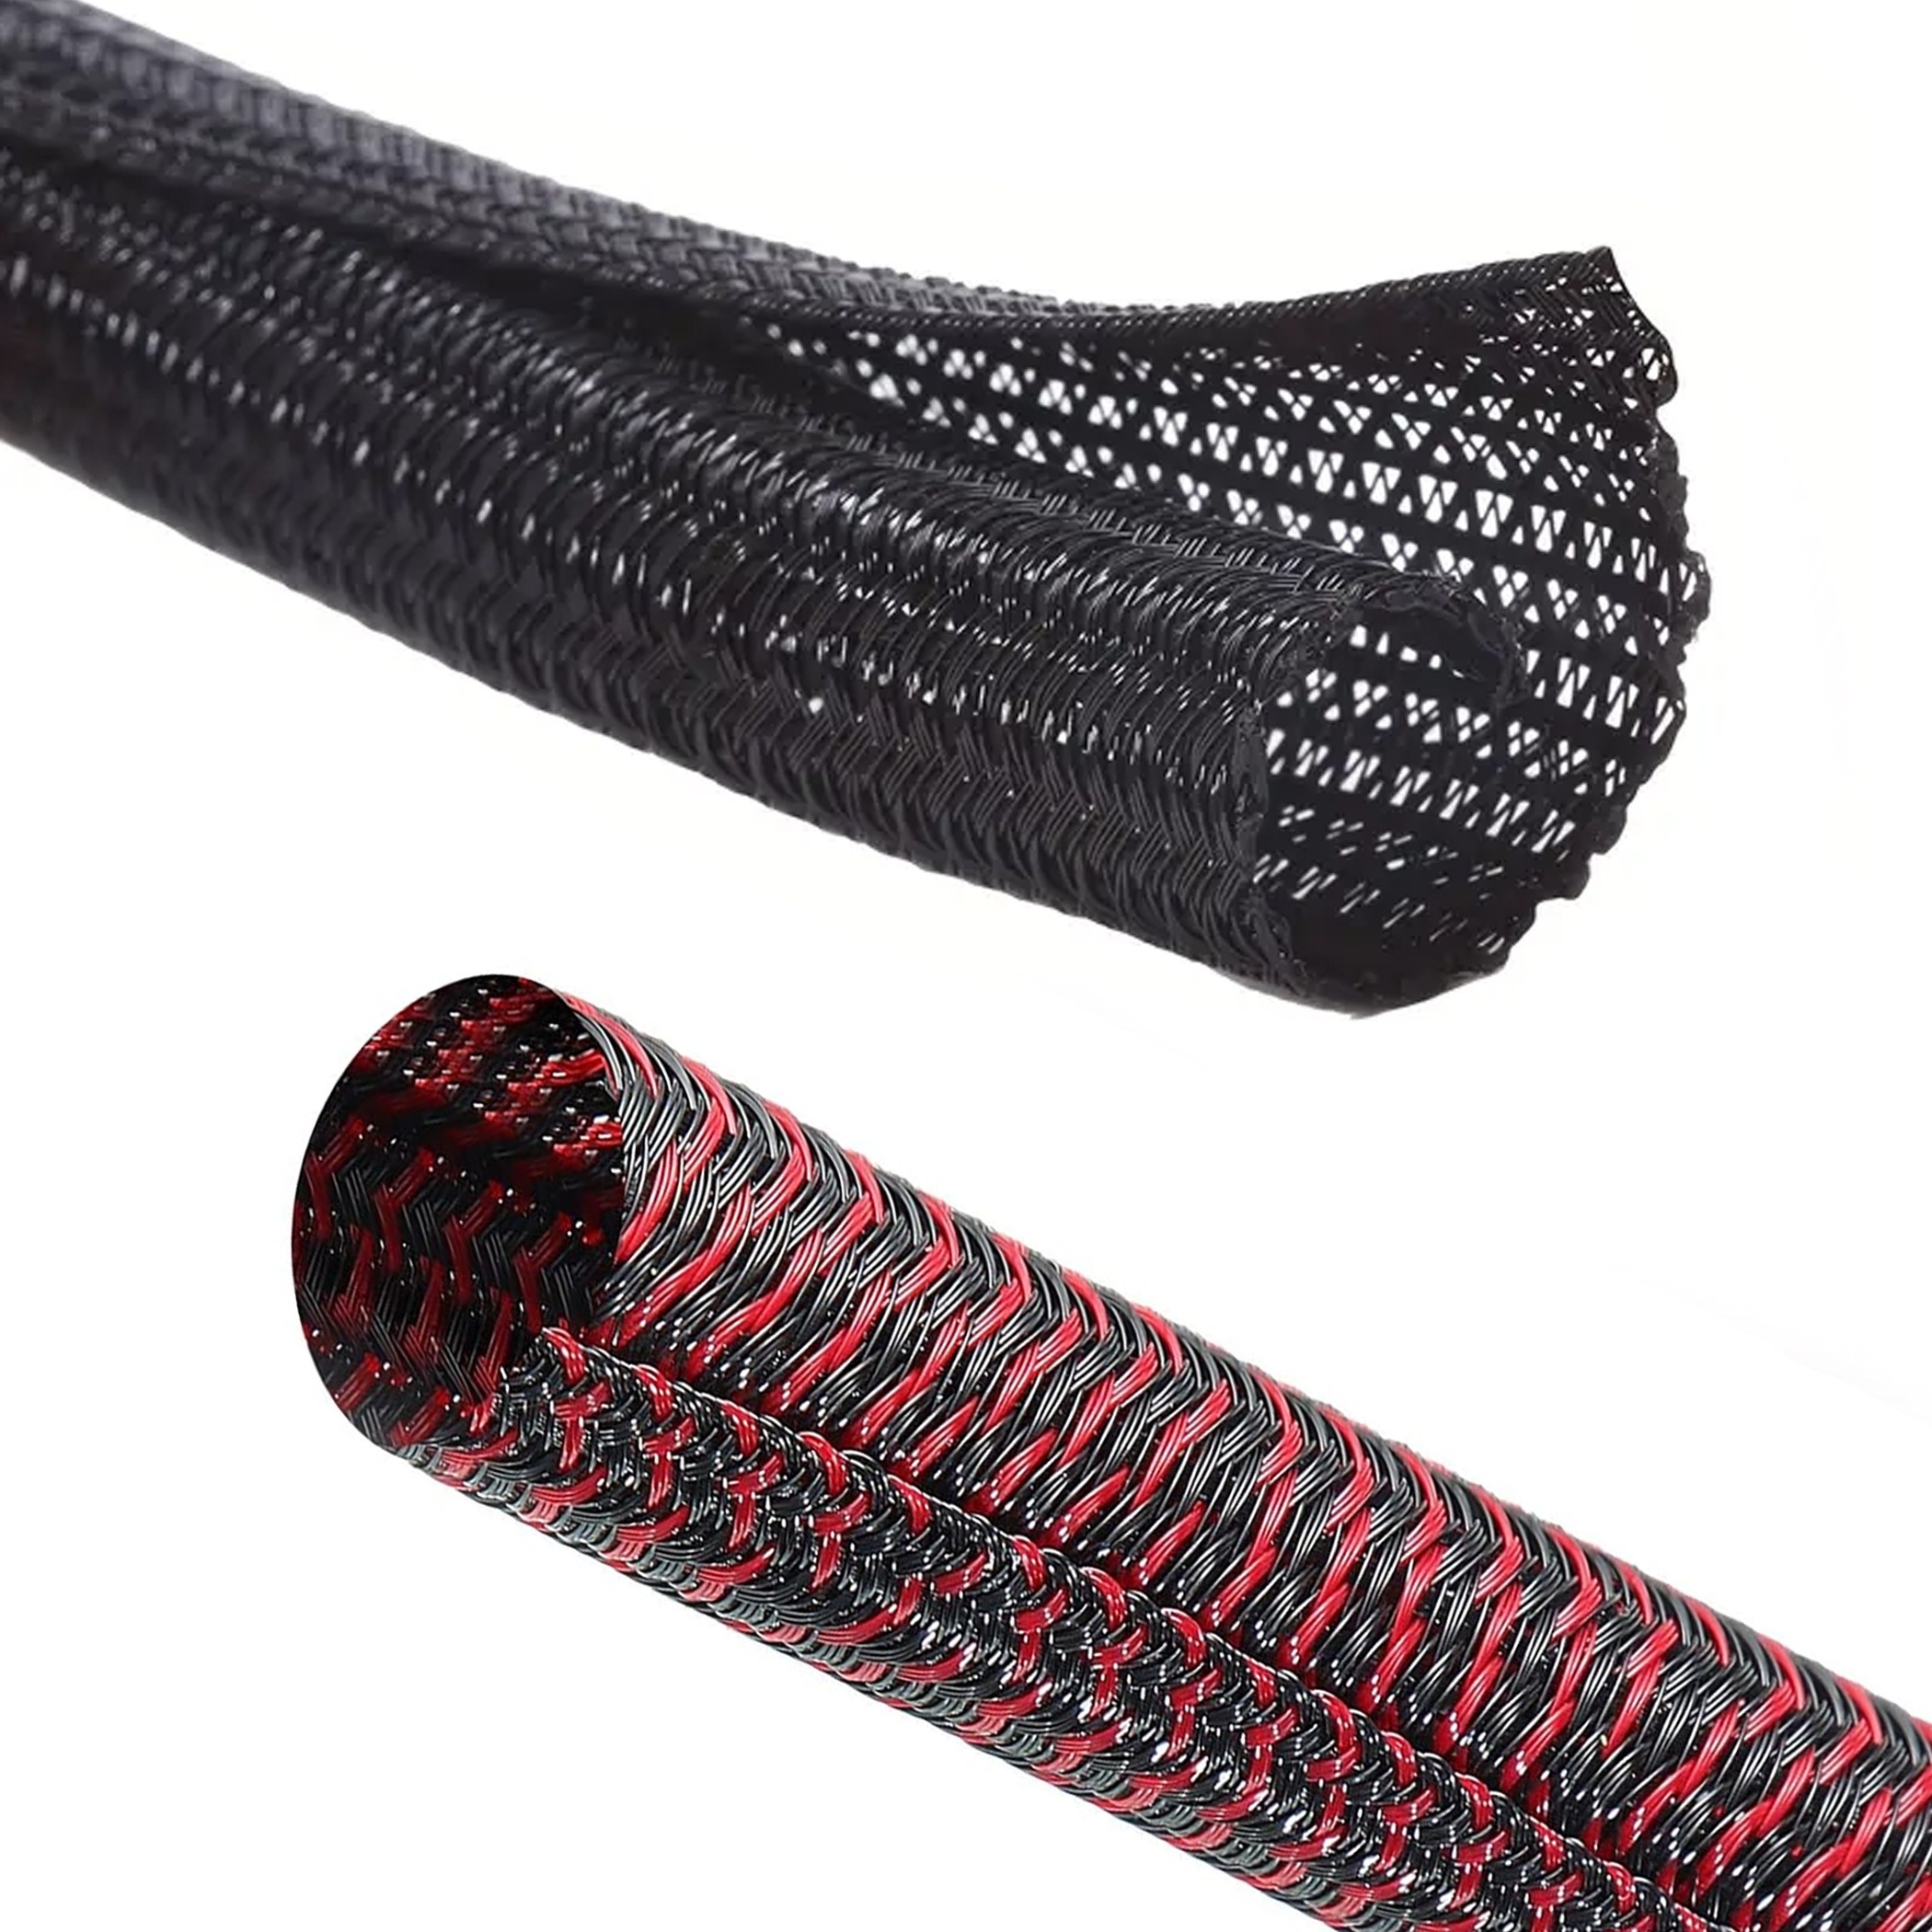 Dyneema Braided Sleeve-Make Cable&Wiring Harness Protection